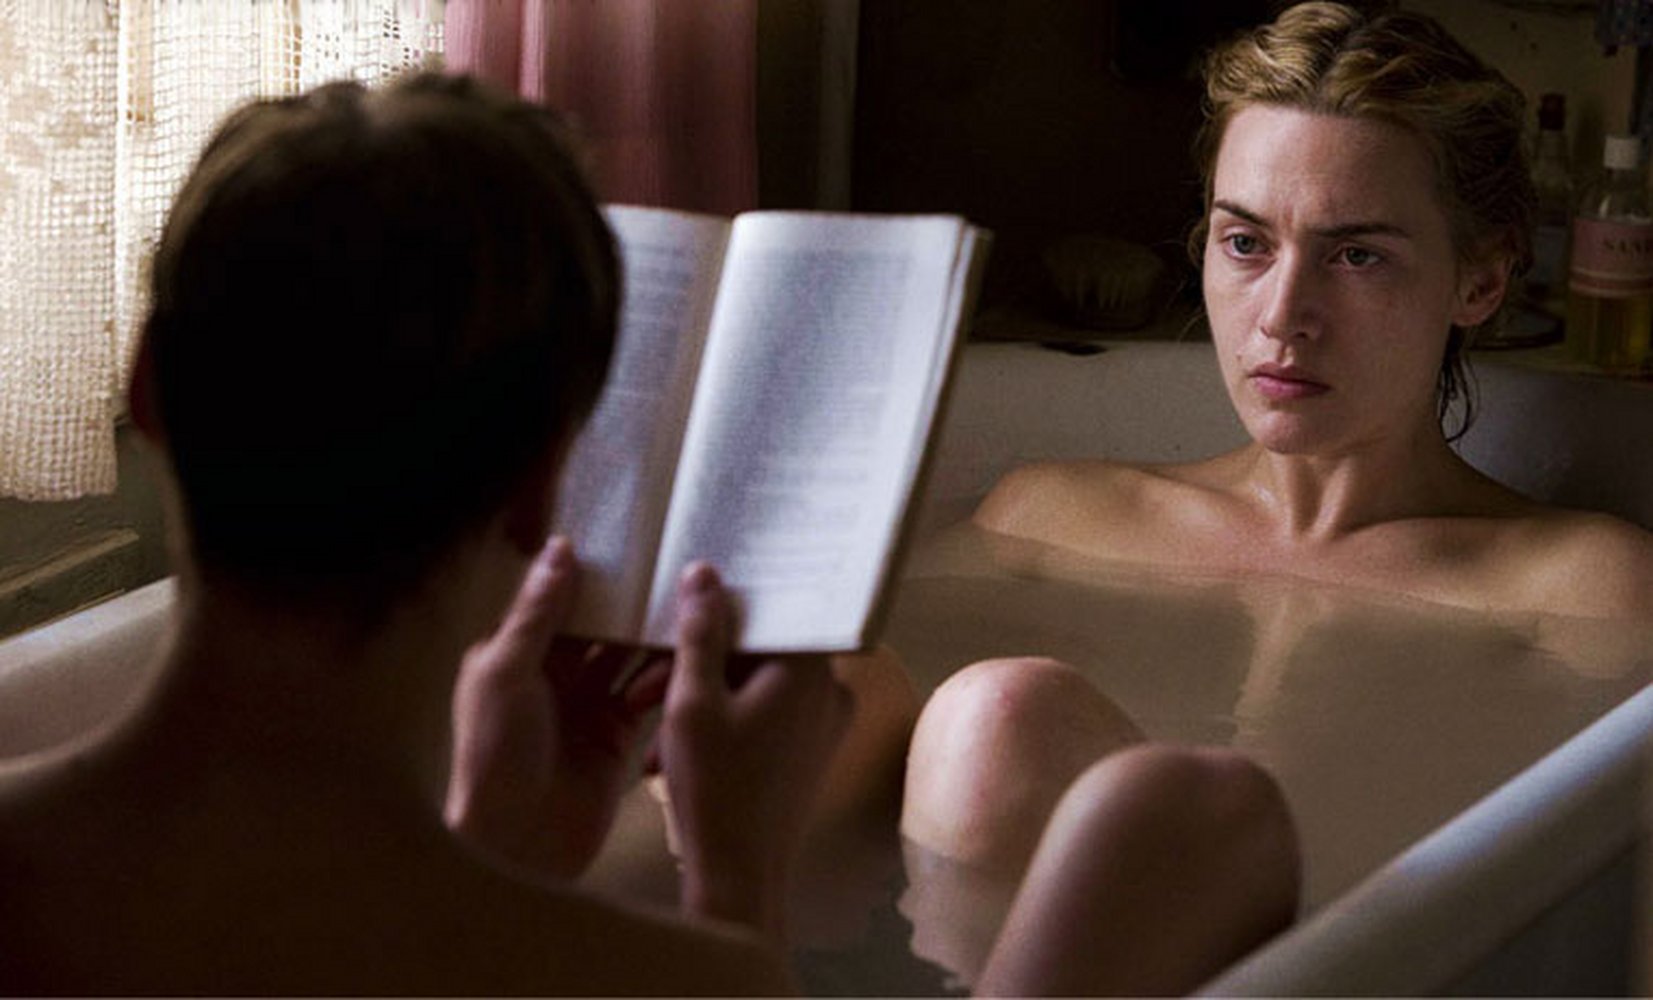 Topless girls reading books cates